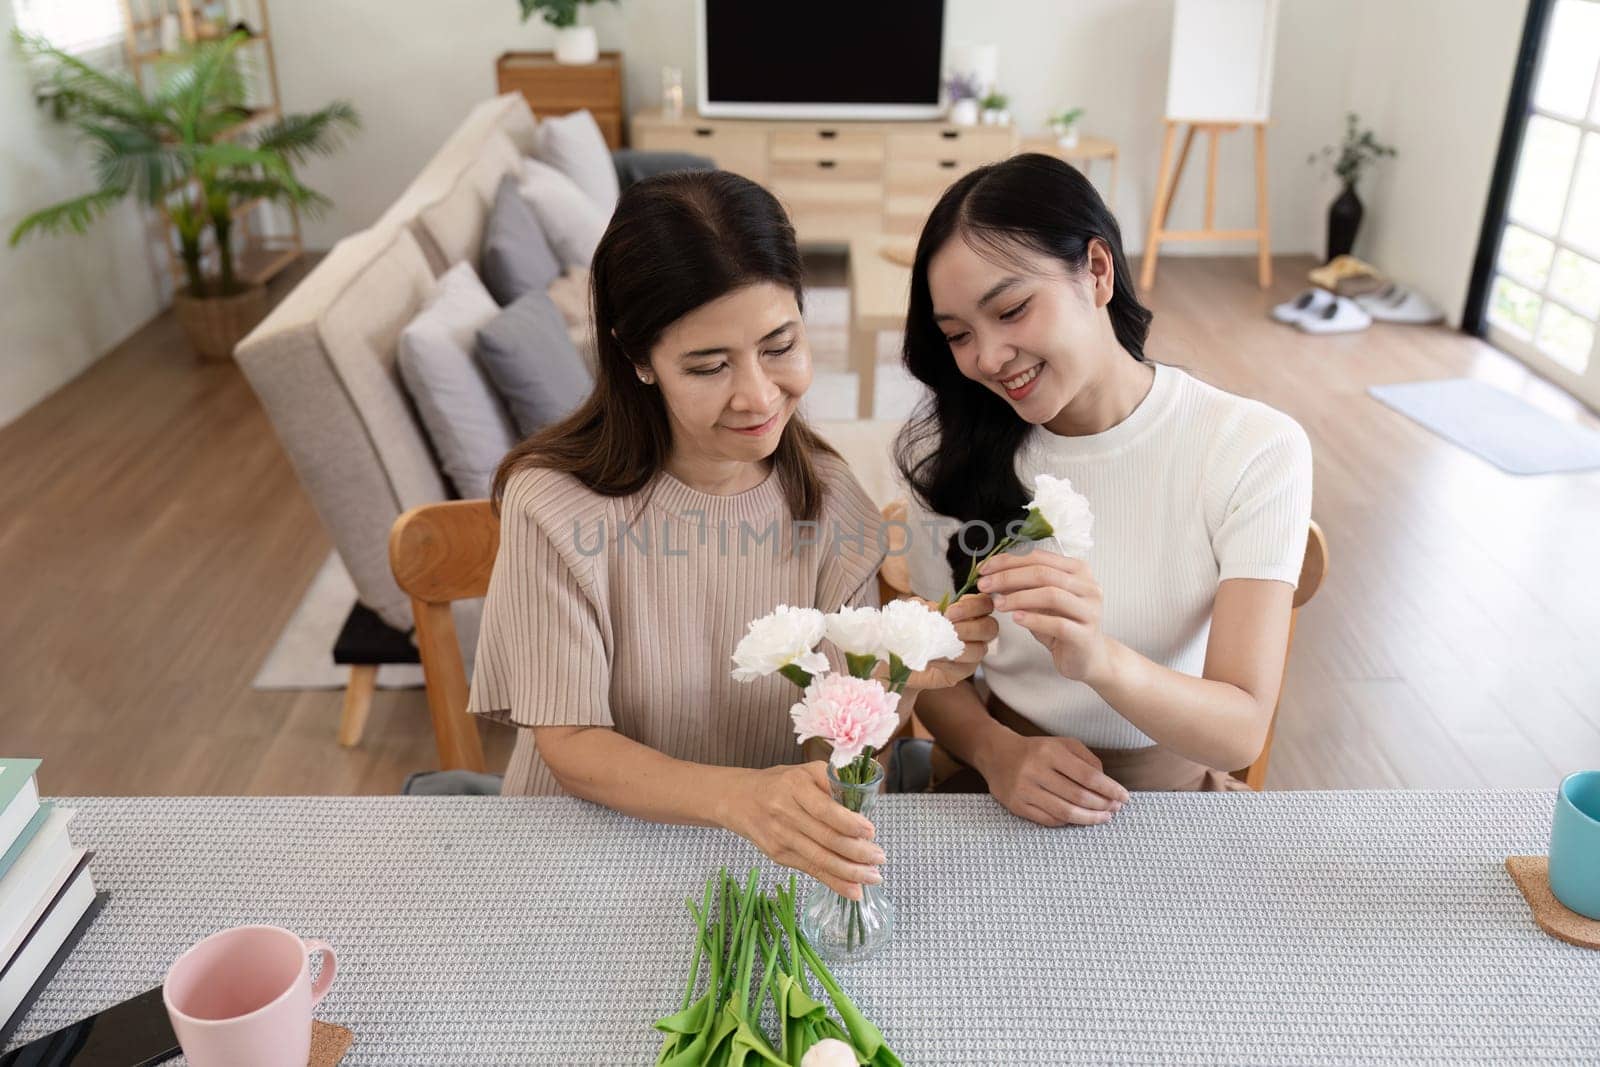 Senior mother and adult daughter happy on the table while arrange flowers in a vase together. Technology and lifestyle concept. Happy time together by nateemee